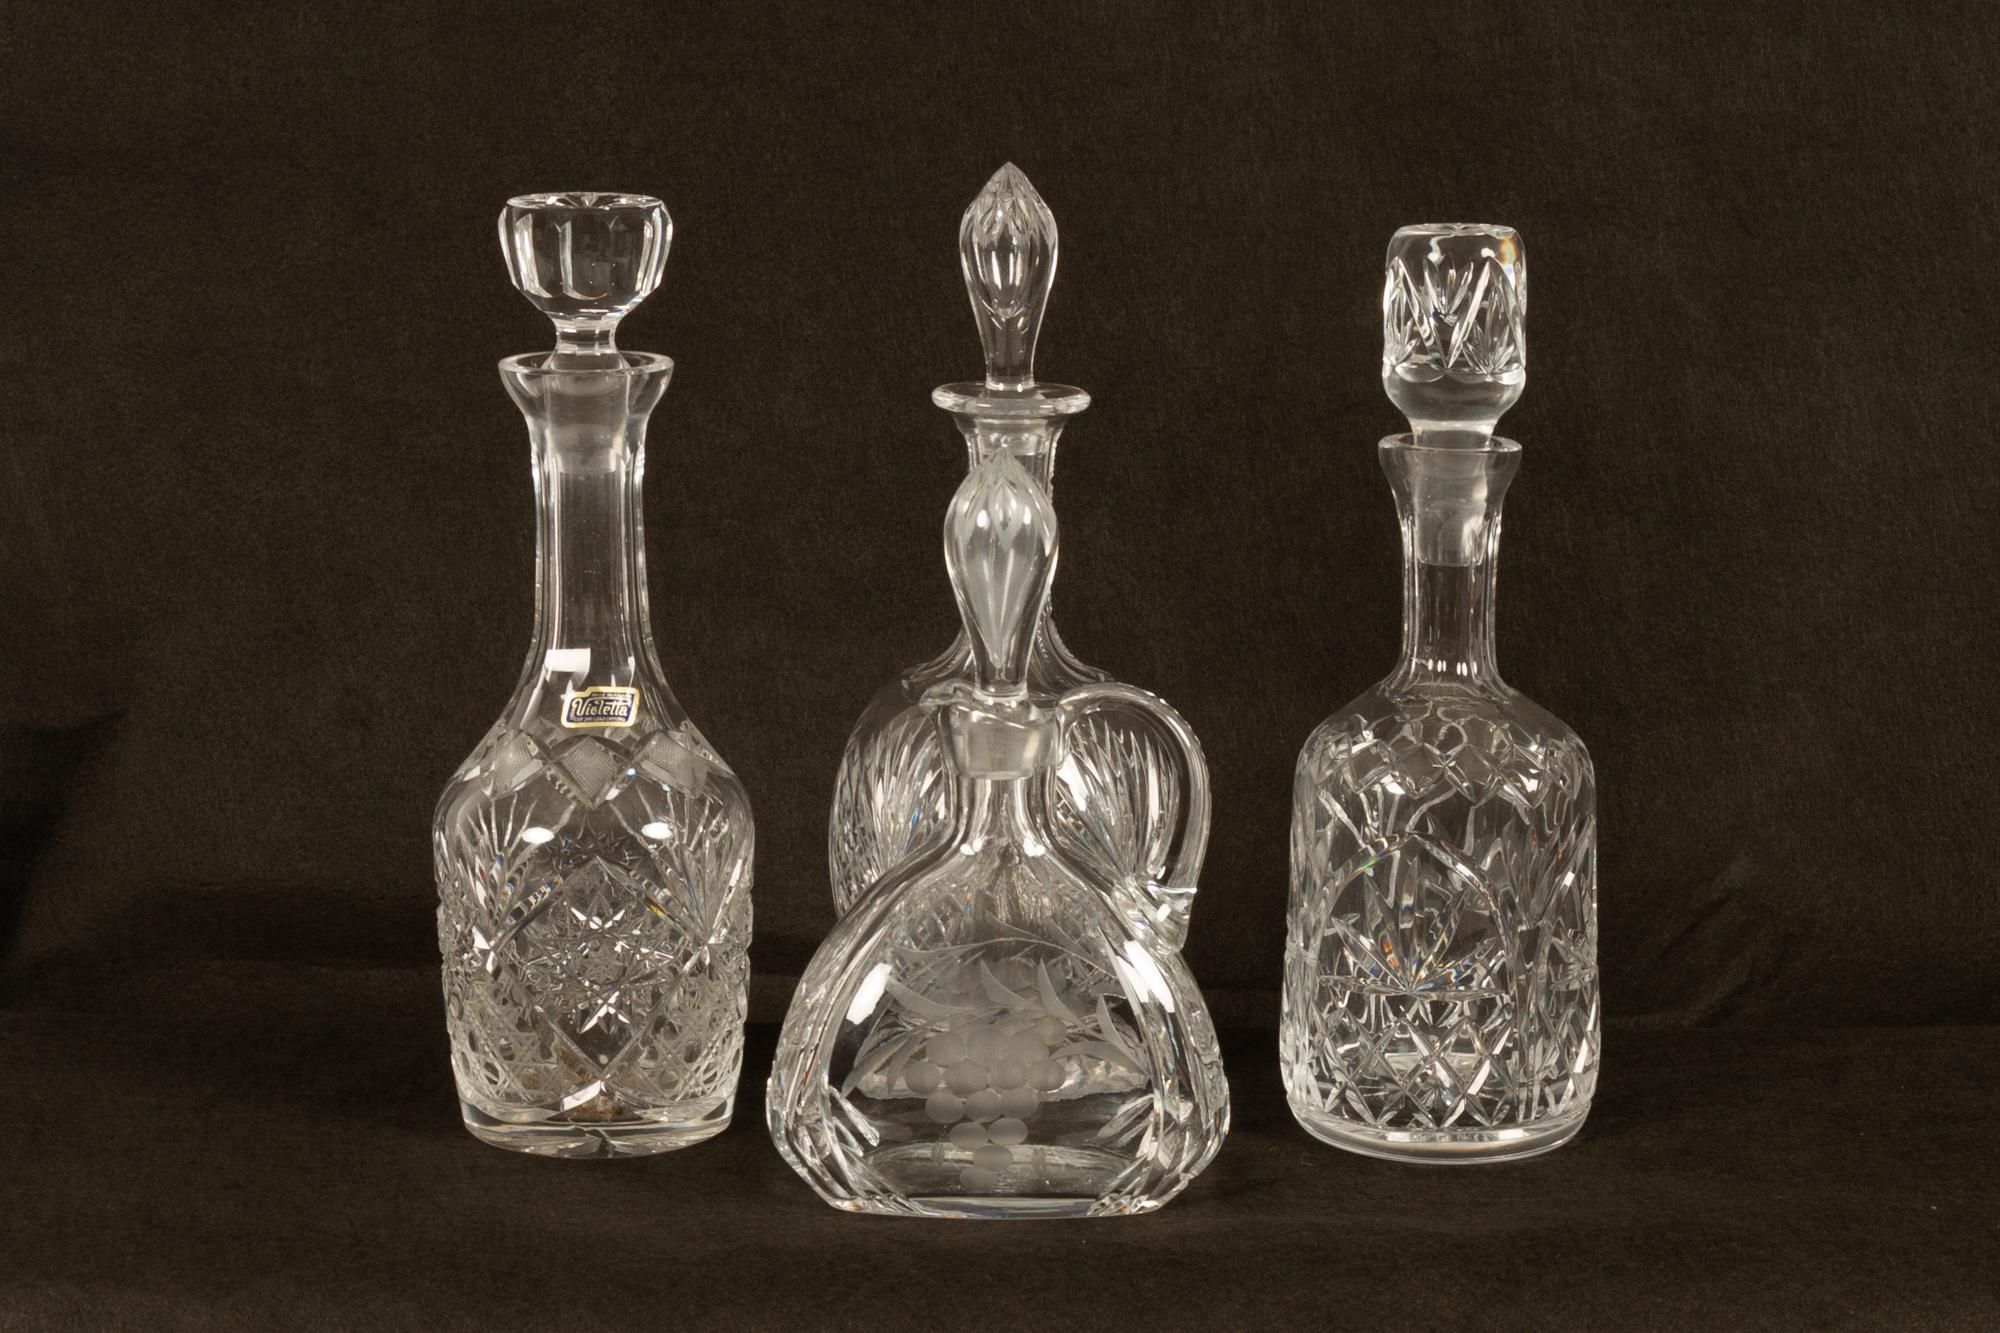 Set of 4 crystal decanters, mid-20th century.
Four cut crystal decanters complete with original stoppers. Suitable for whiskey, cognac, port and other spirits.
Measures: Heights 24 - 31cm
Good condition. No defects, chips or cracks.